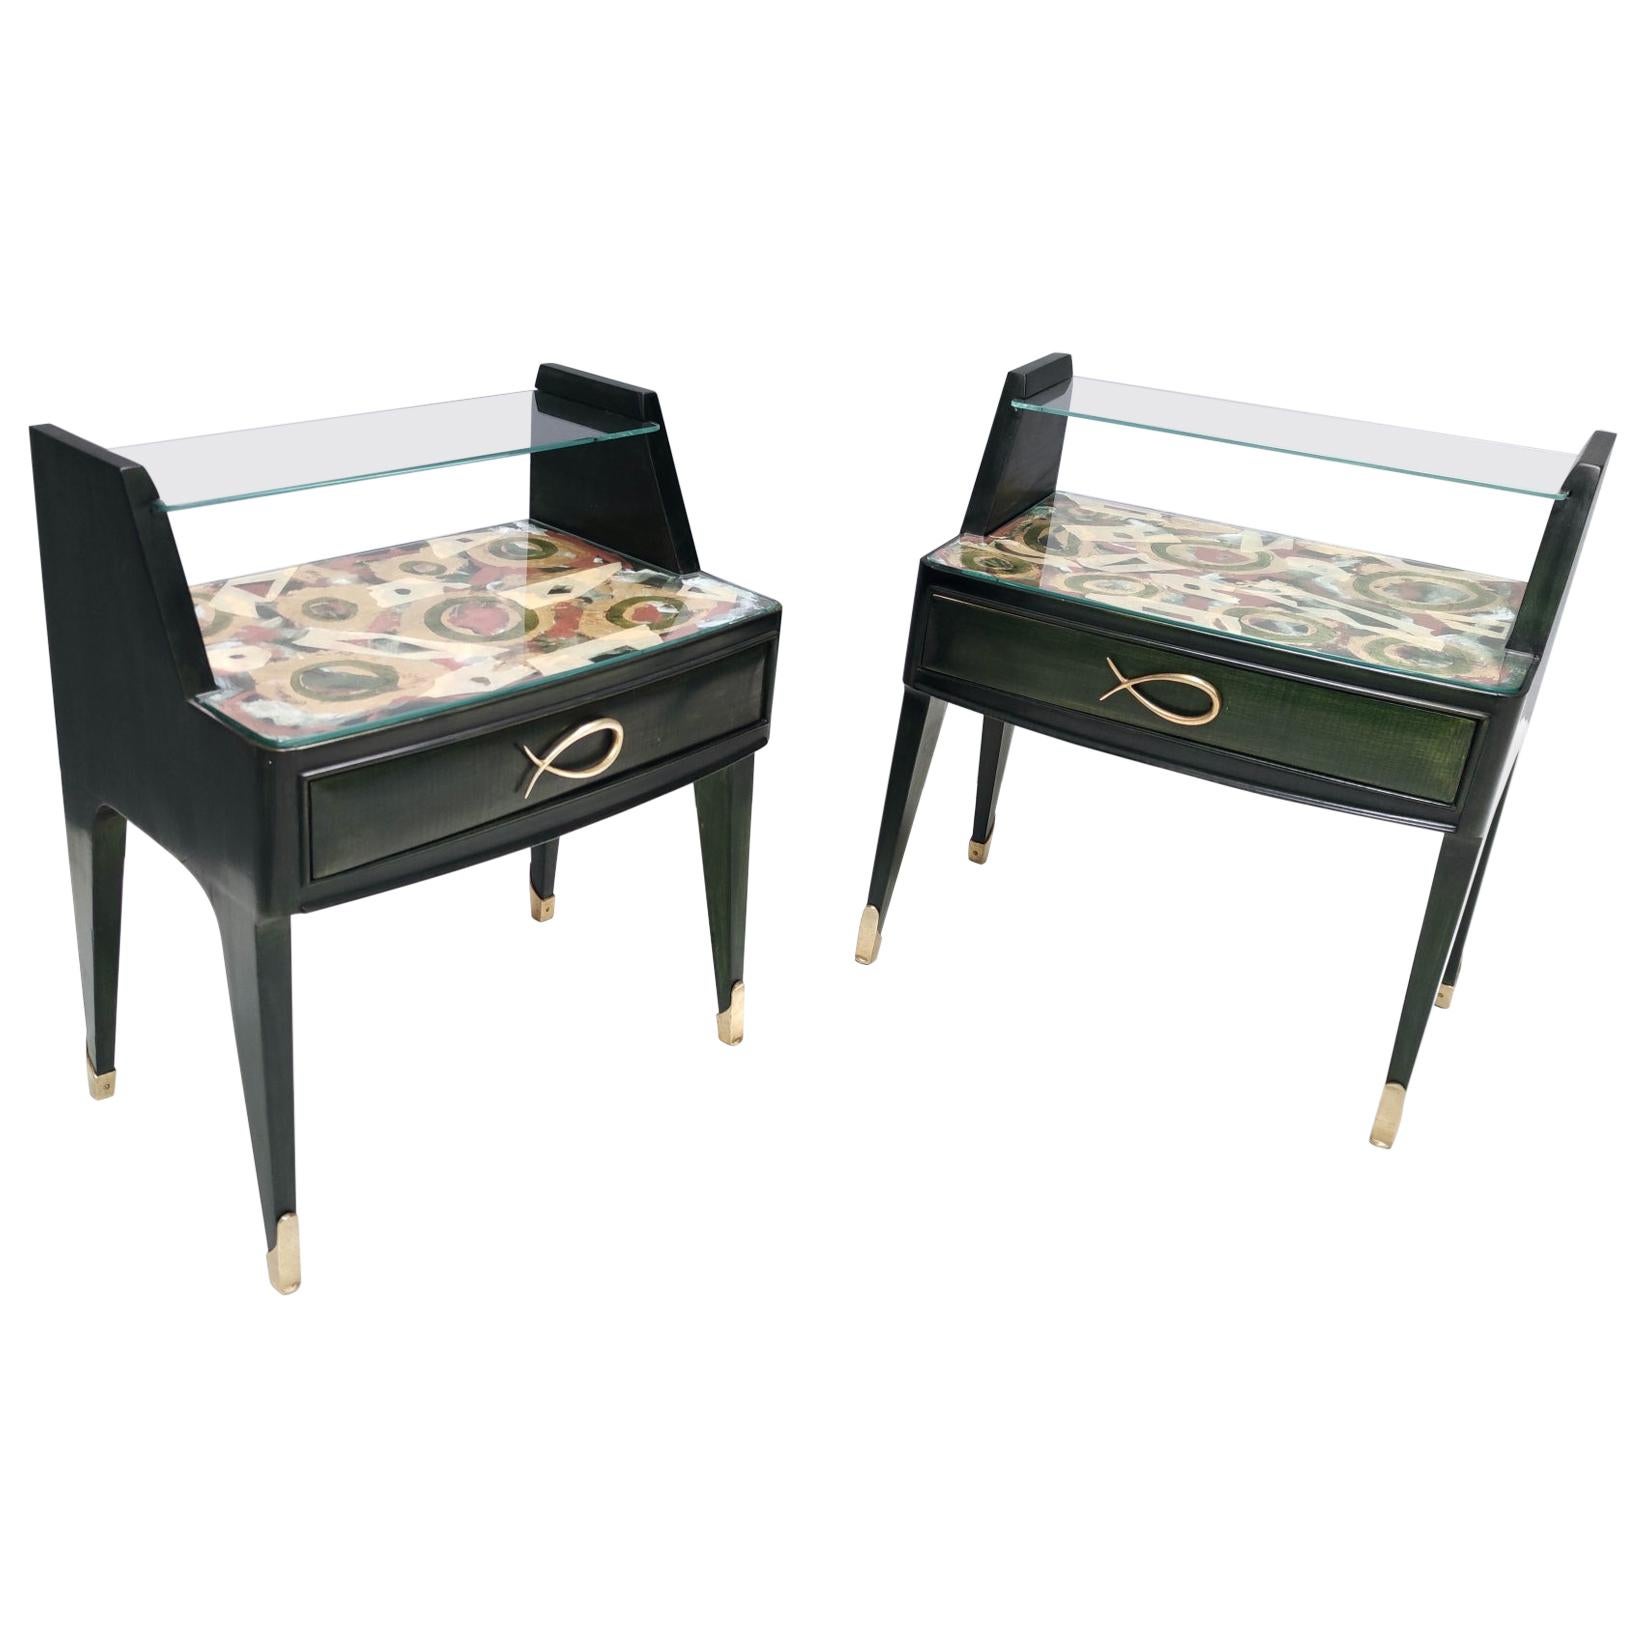 Pair of Dark Green Wooden Nightstands in 1950s Style with a Decorated Top, Italy For Sale